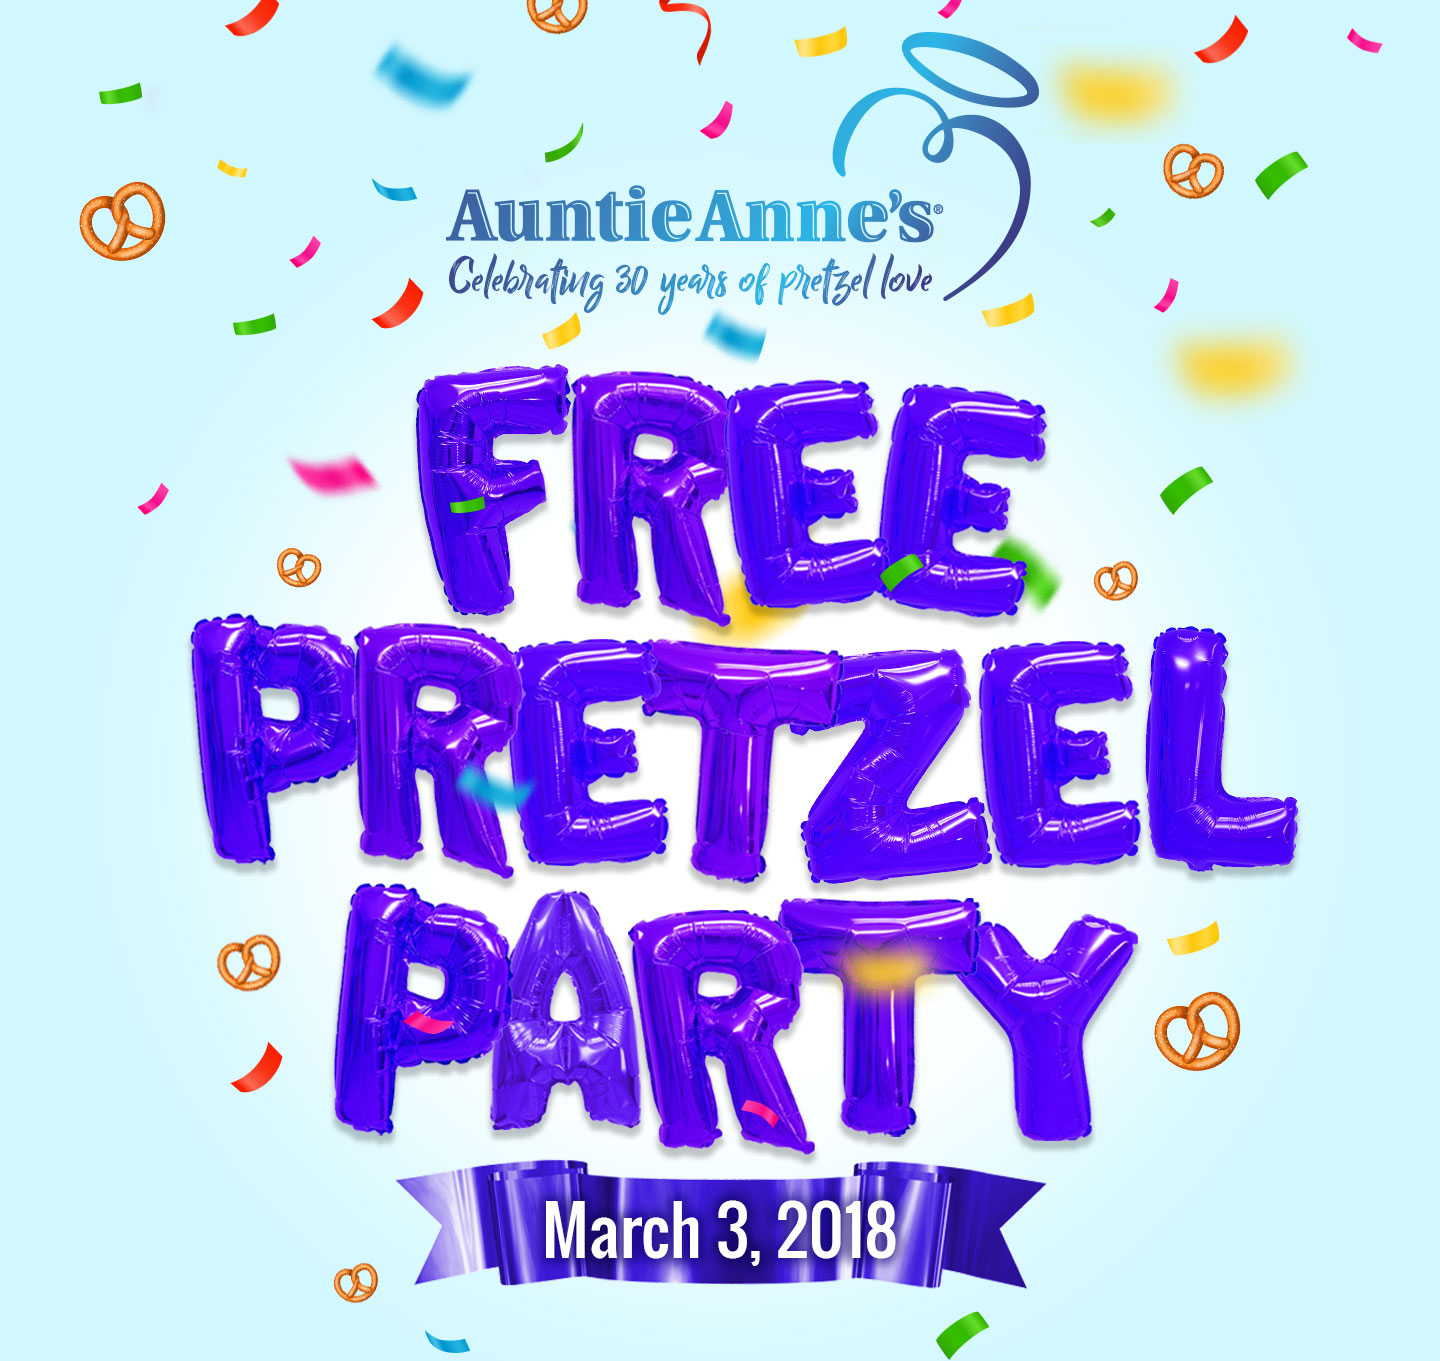 Free Pretzel Party for Auntie Anne’s 30th Birthday - If Auntie Anne's can get one million RSVP's they will give away one free pretzel to everyone. Let's help them get one million! #HBDAuntieAnnes